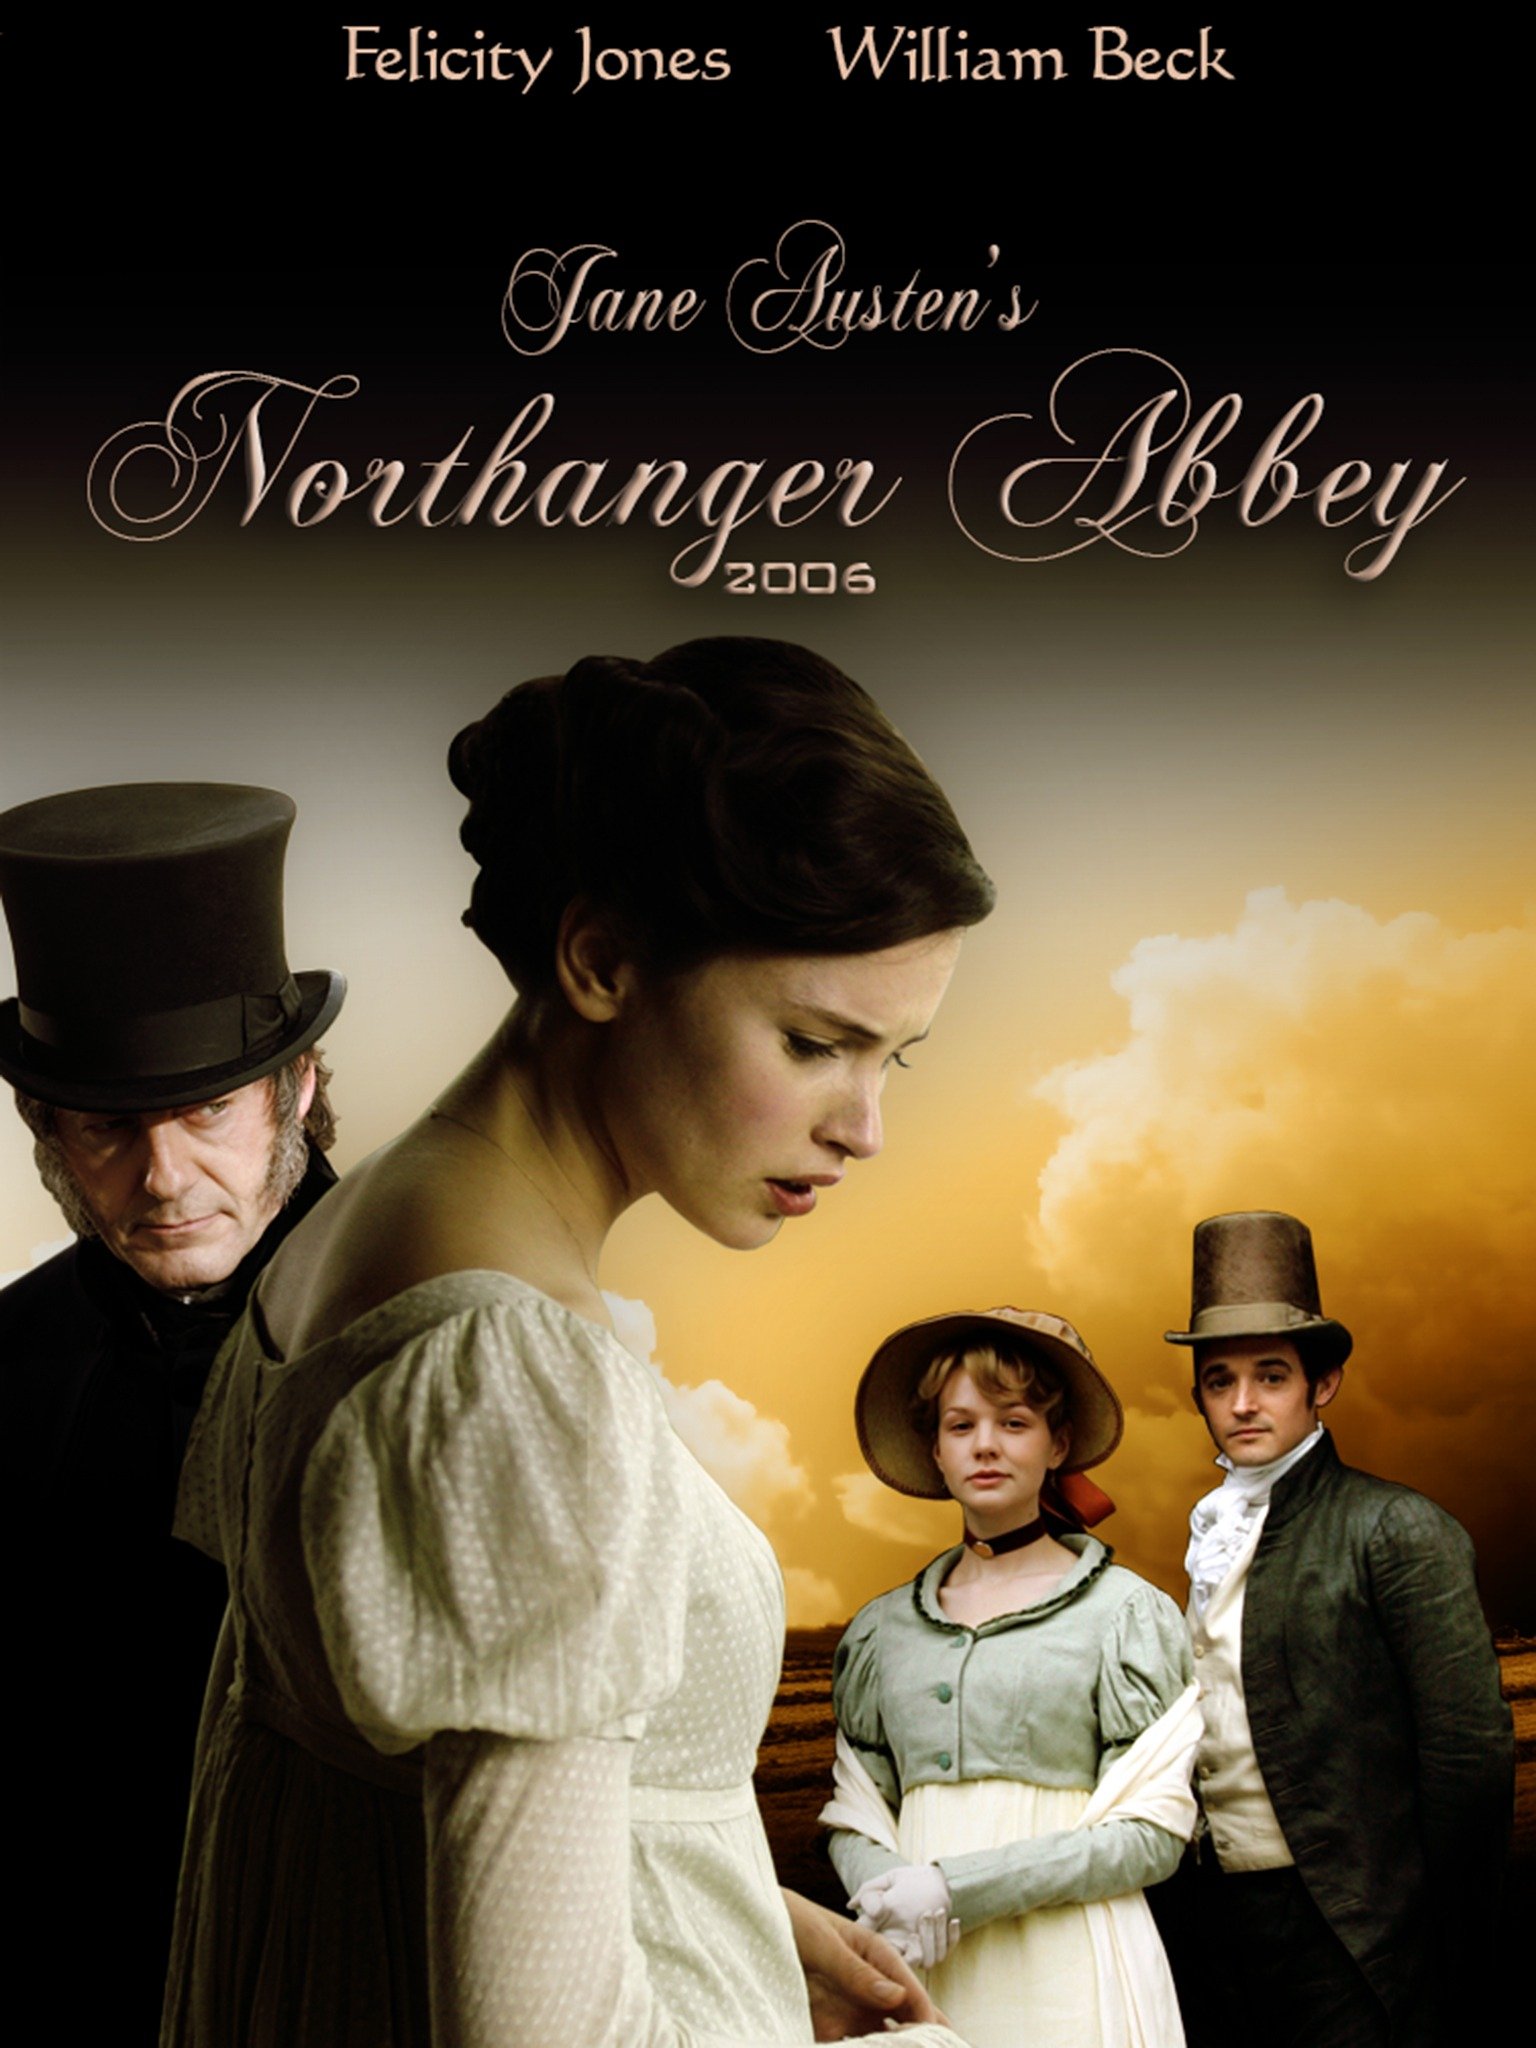 northanger abbey essay questions